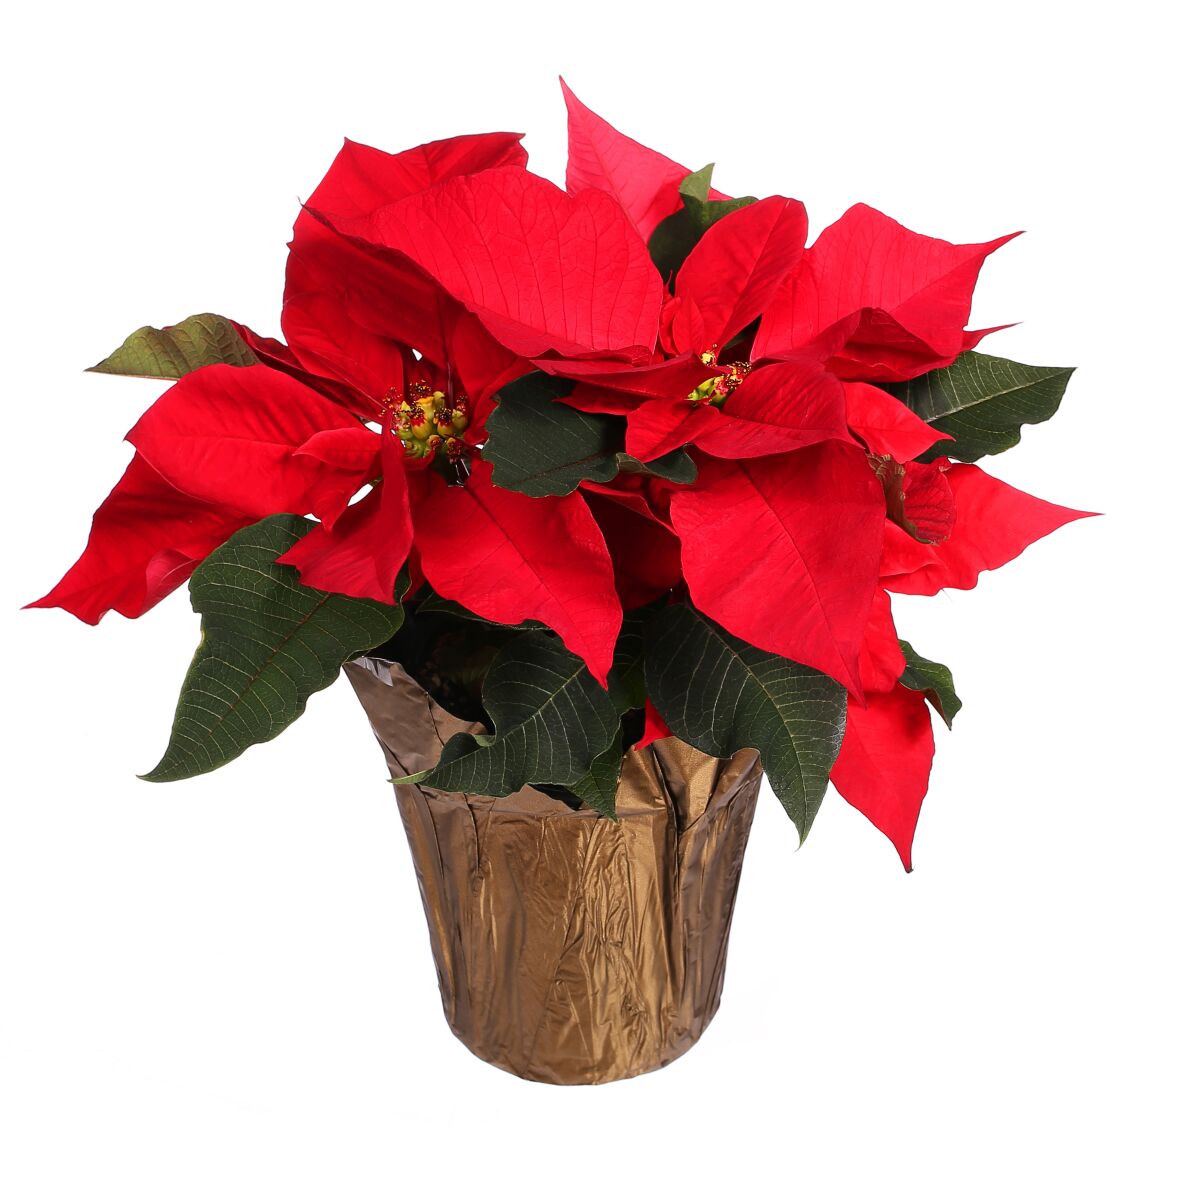 Remove the foil as soon as you get a poinsettia home. Place it in a bright room away from heater vents and cold windows.